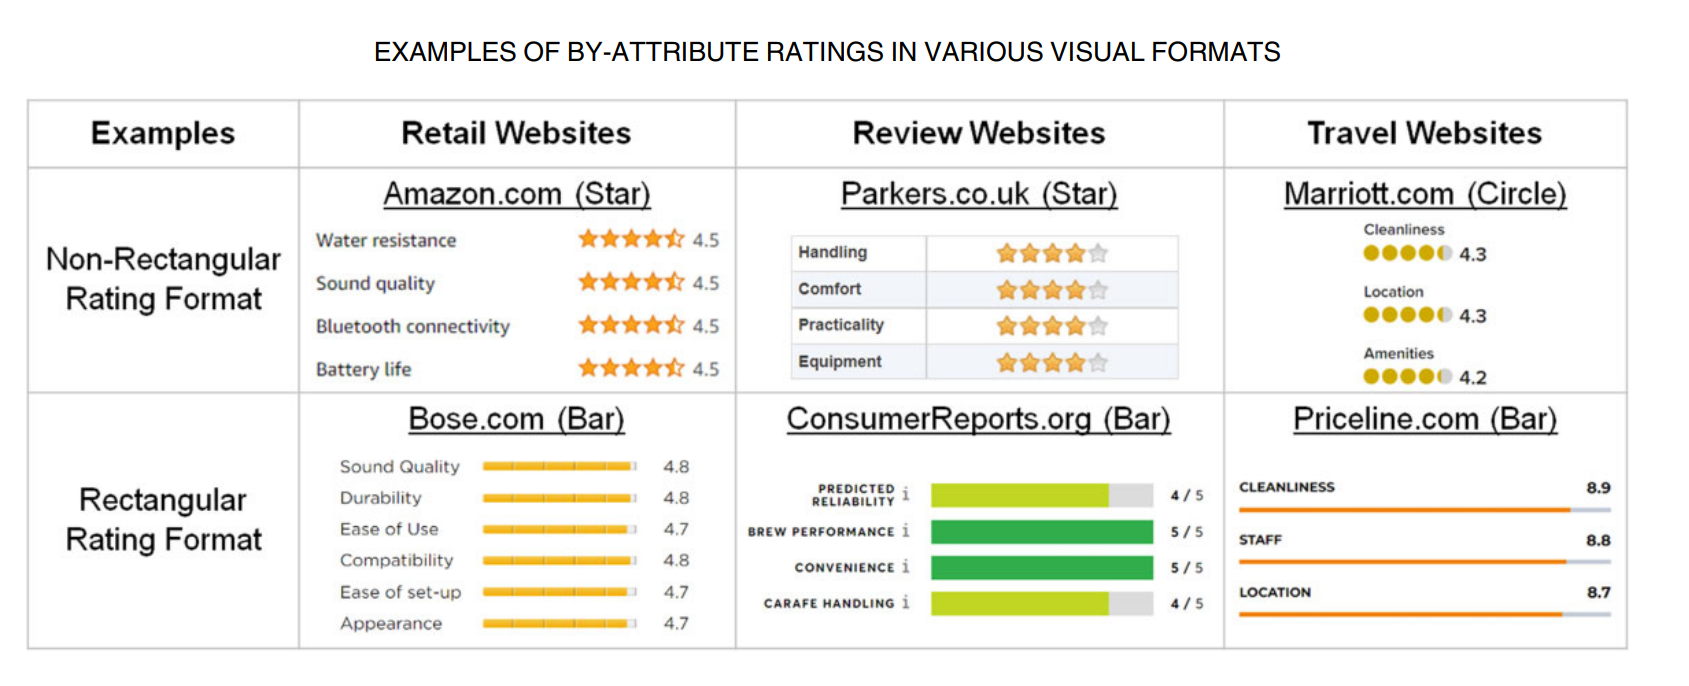 By-attribute ratings in various visual formats